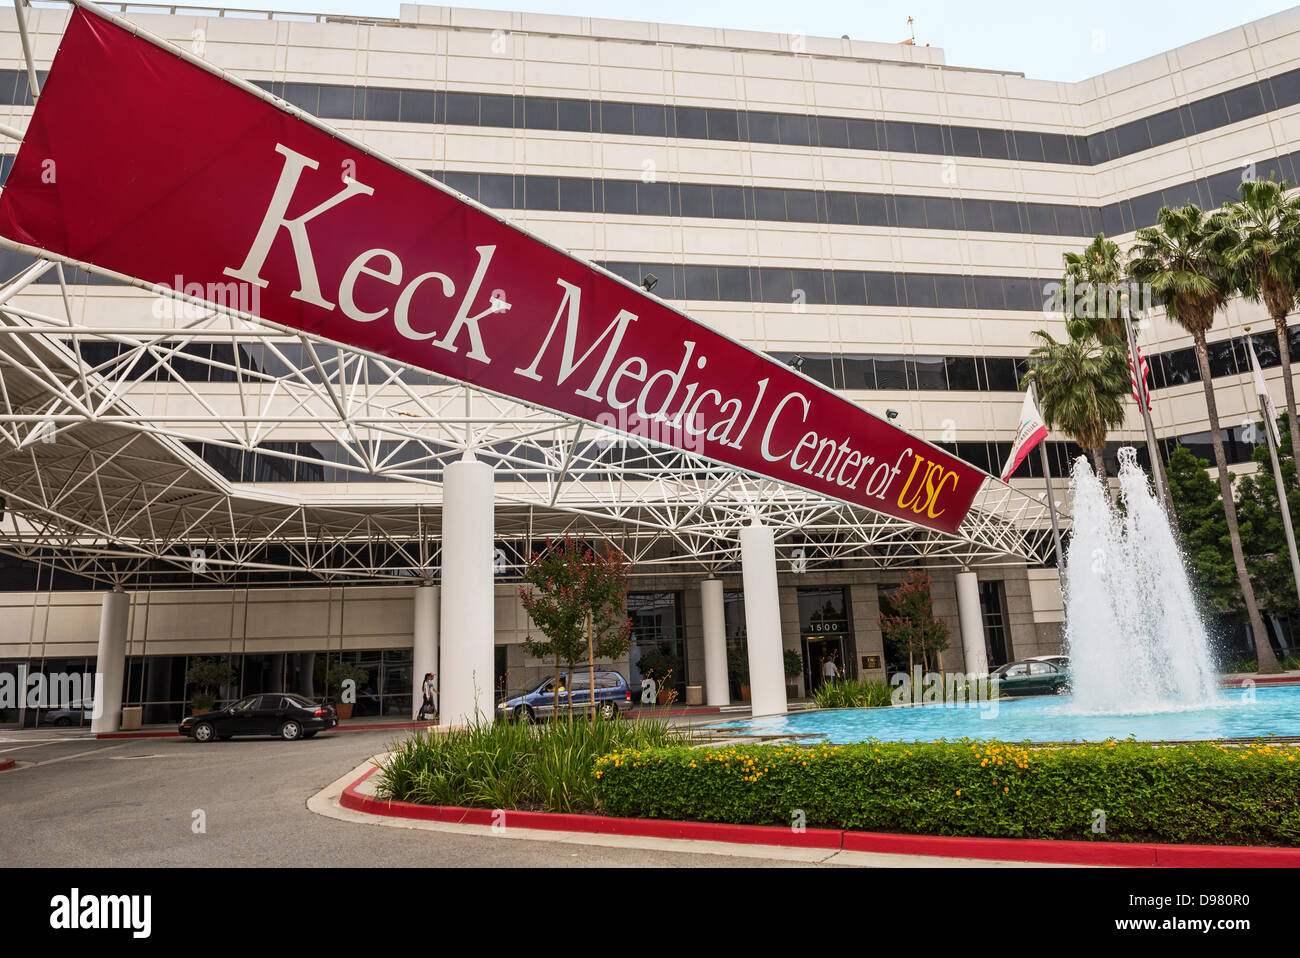 Keck Medical Center of the University of Southern California, USC. Stock Photo